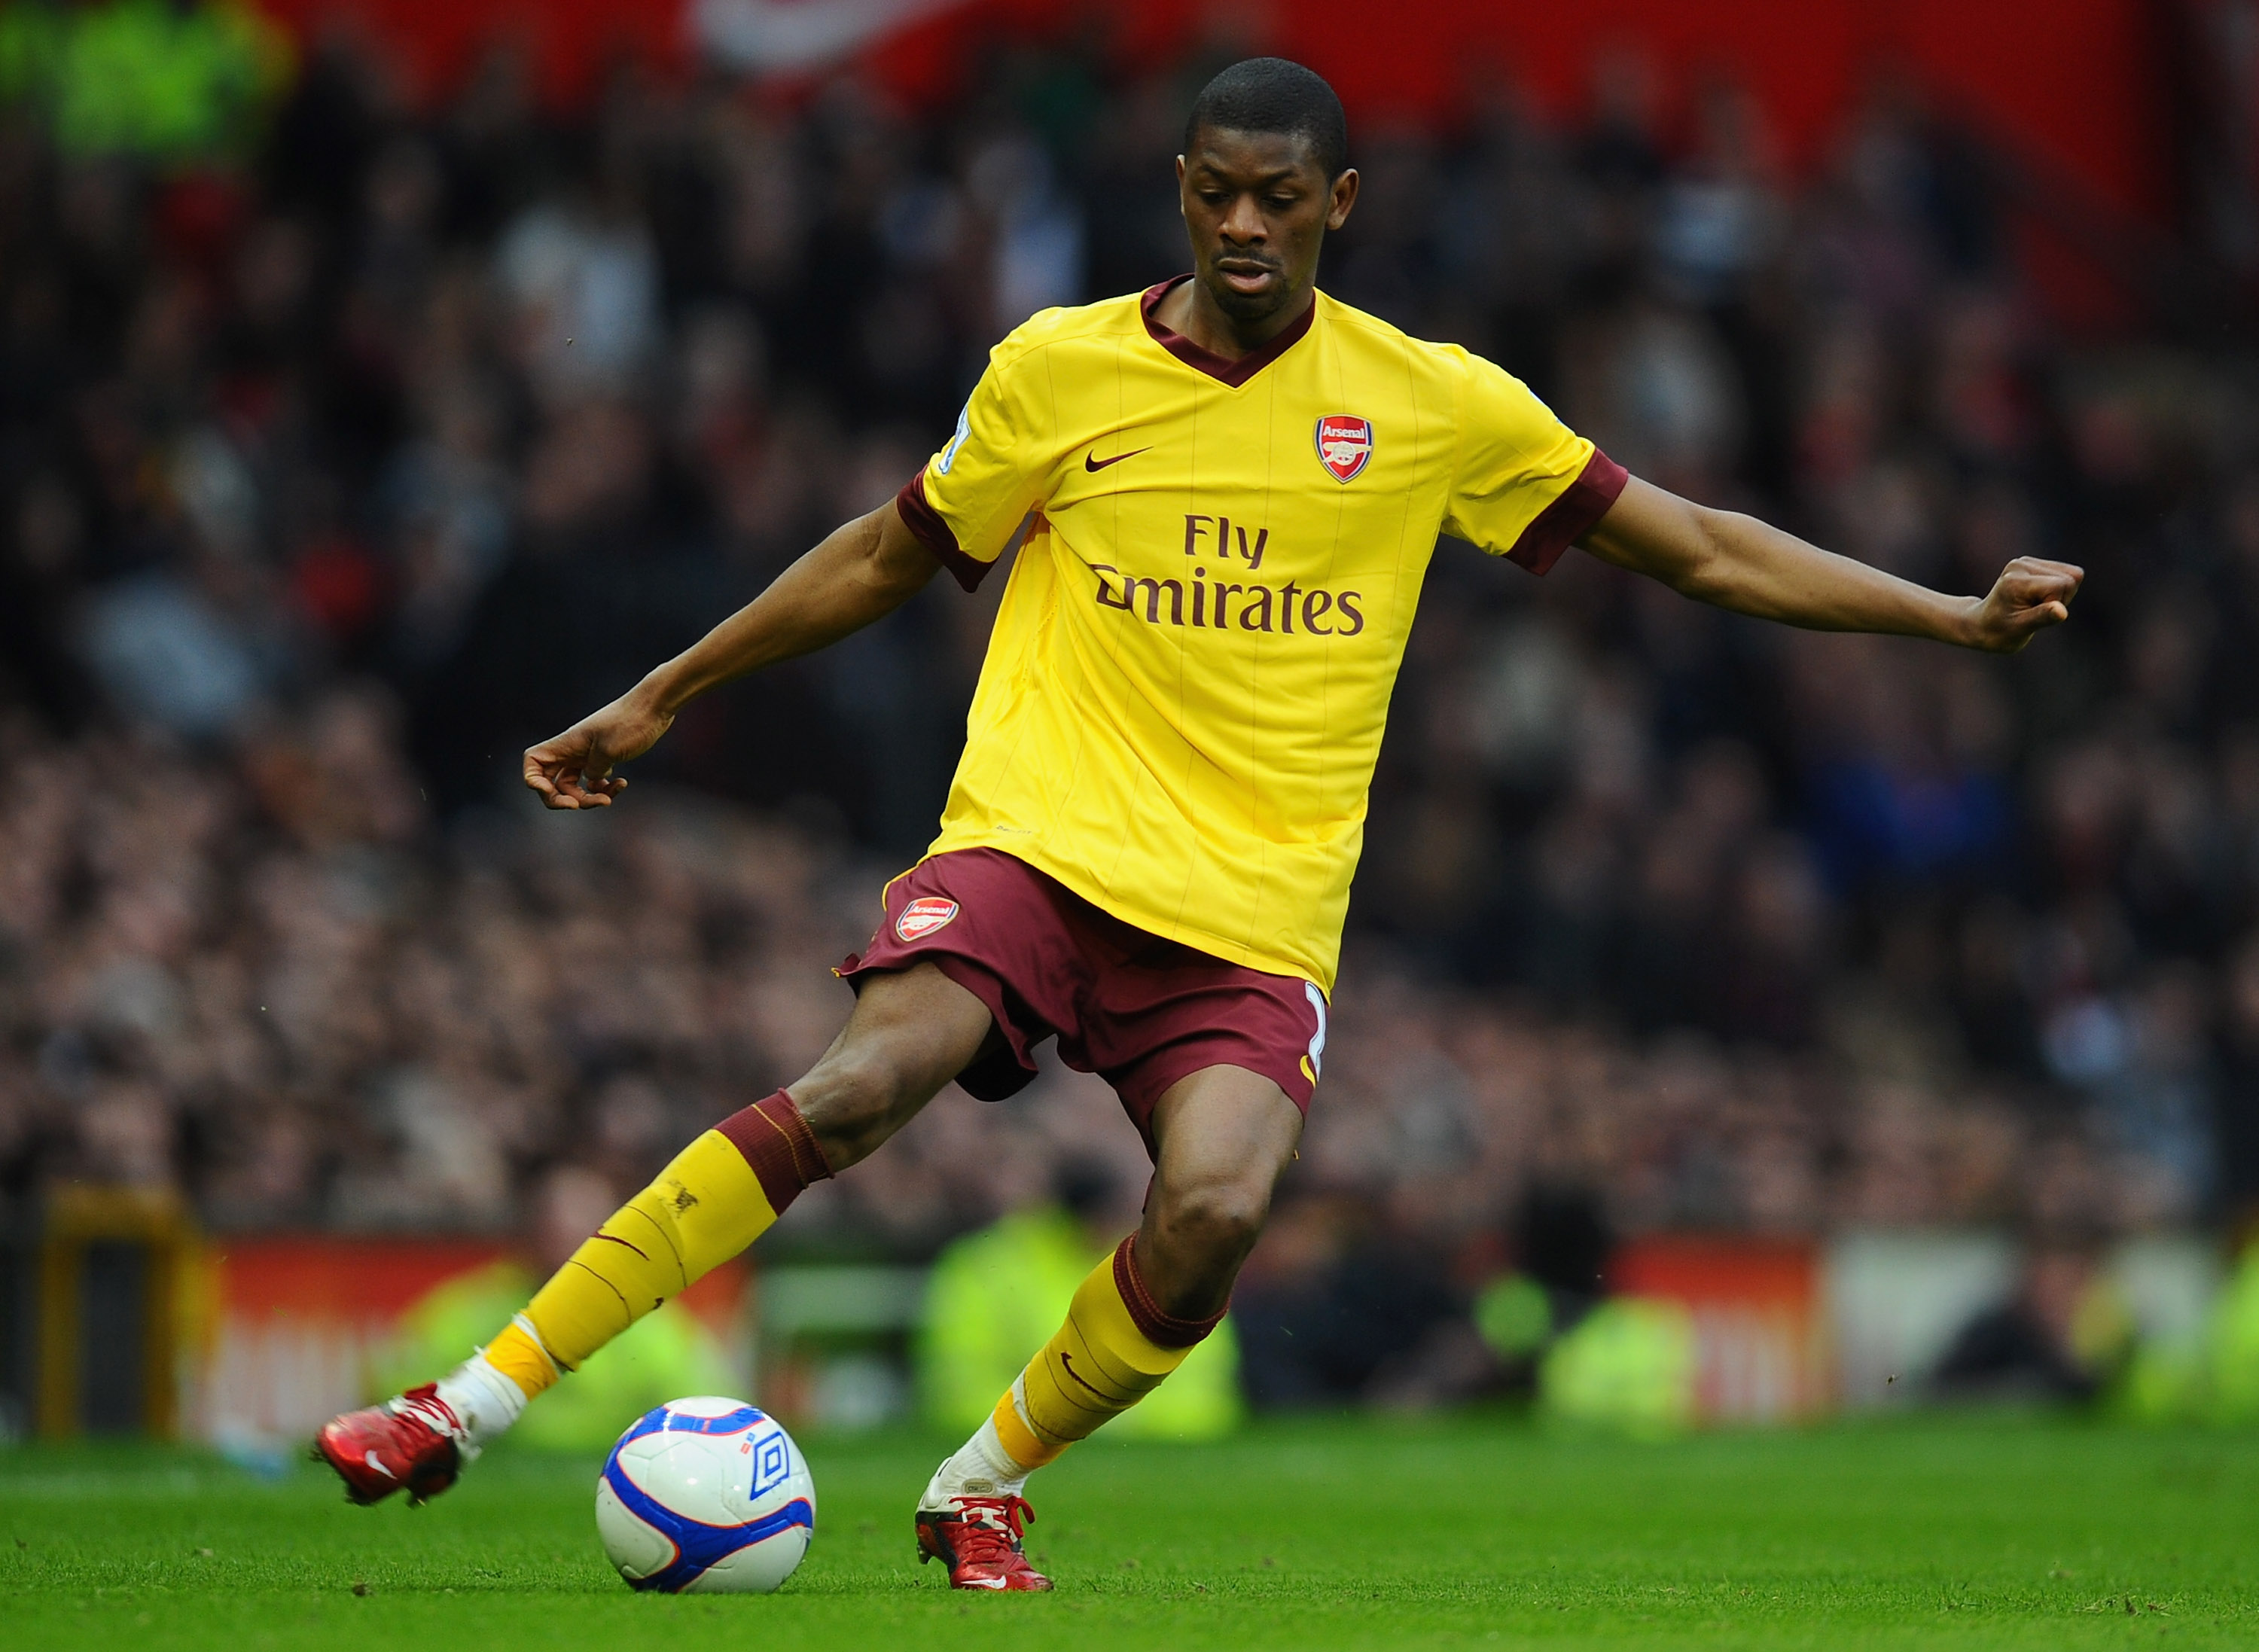 MANCHESTER, ENGLAND - MARCH 12:  Abou Diaby of Arsenal passes the ball during the FA Cup sponsored by E.On Sixth Round match between Manchester United and Arsenal at Old Trafford on March 12, 2011 in Manchester, England.  (Photo by Clive Mason/Getty Image